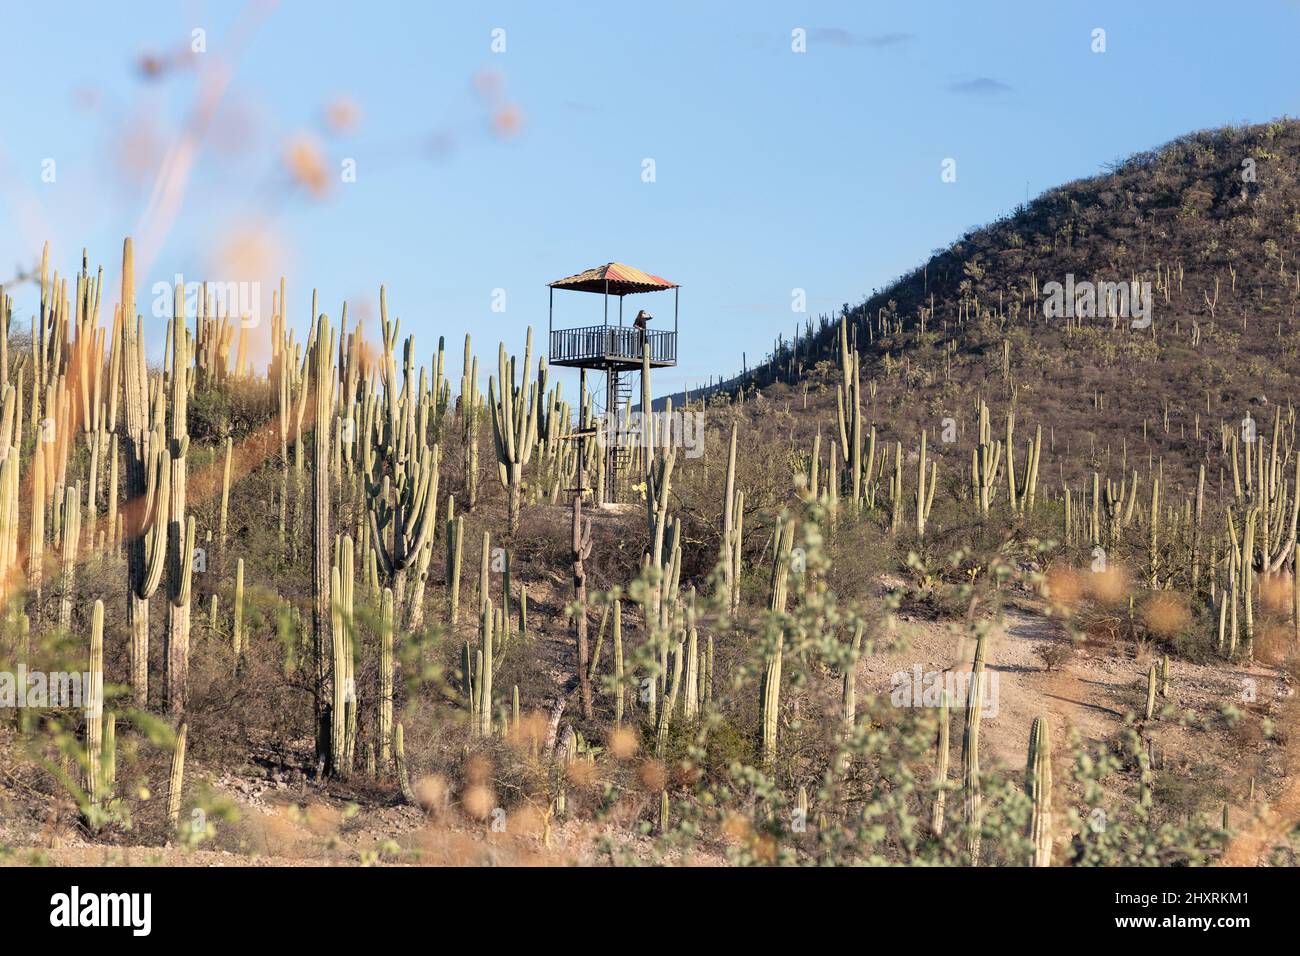 Woman on Bird hide in the Mexican desert with cacti Stock Photo